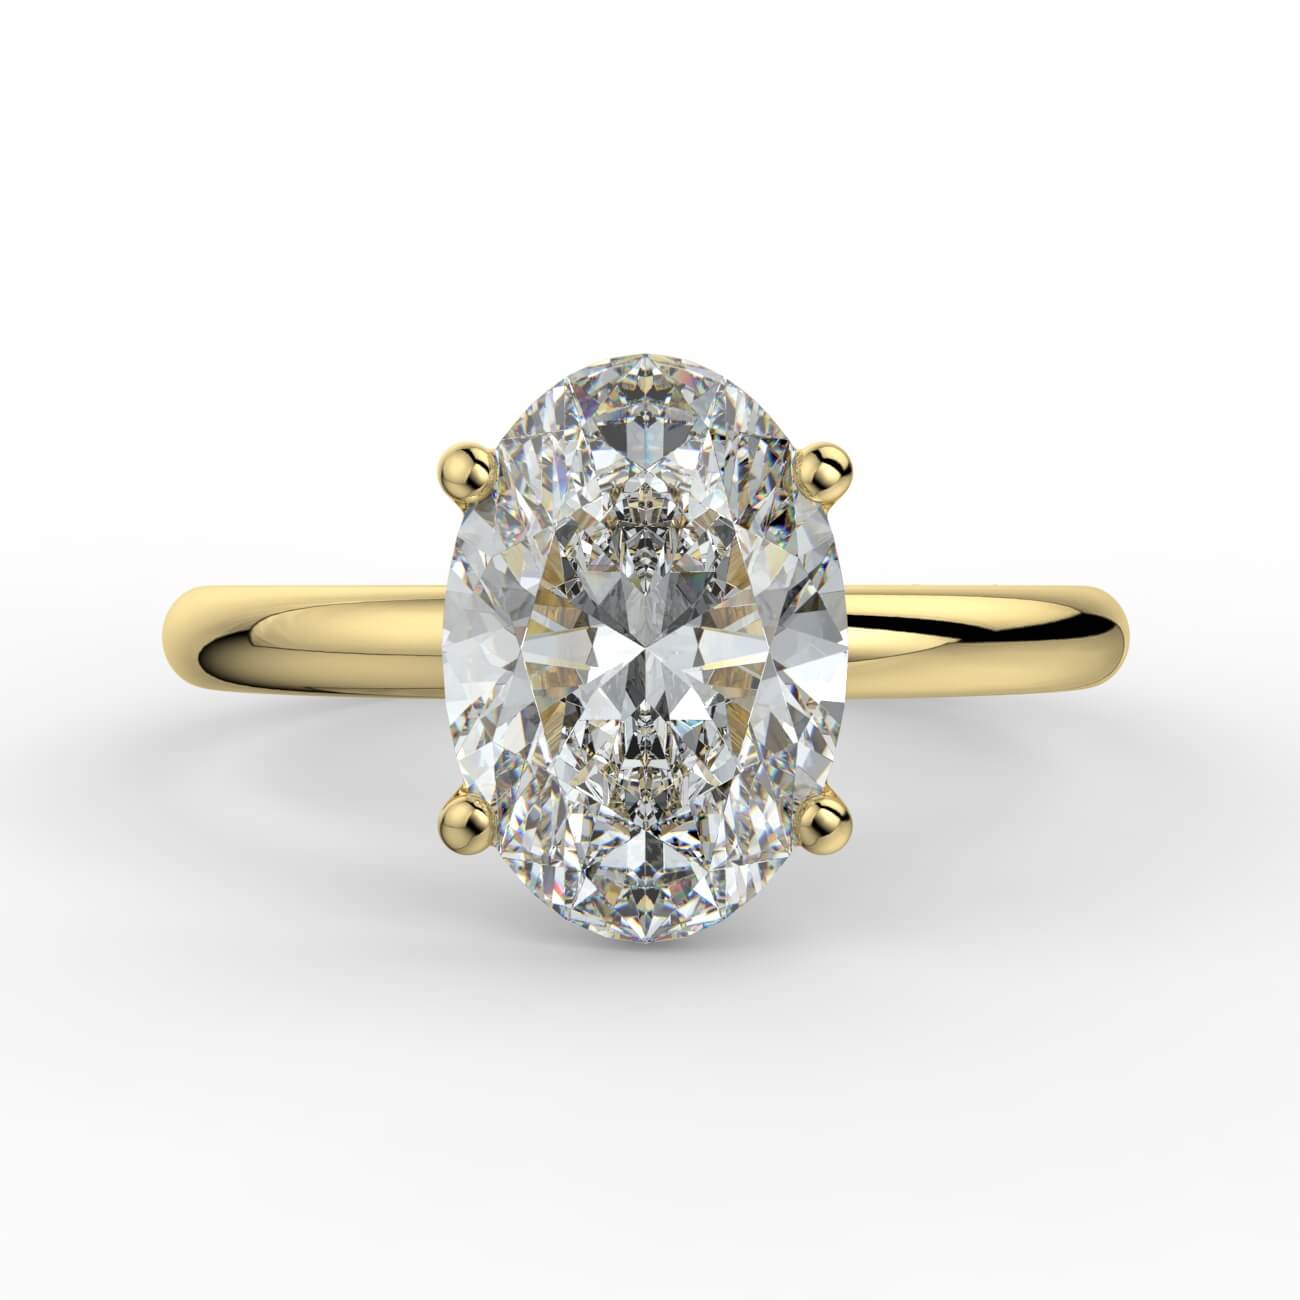 Comfort fit 4 claw oval solitaire diamond ring in yellow gold – Australian Diamond Network